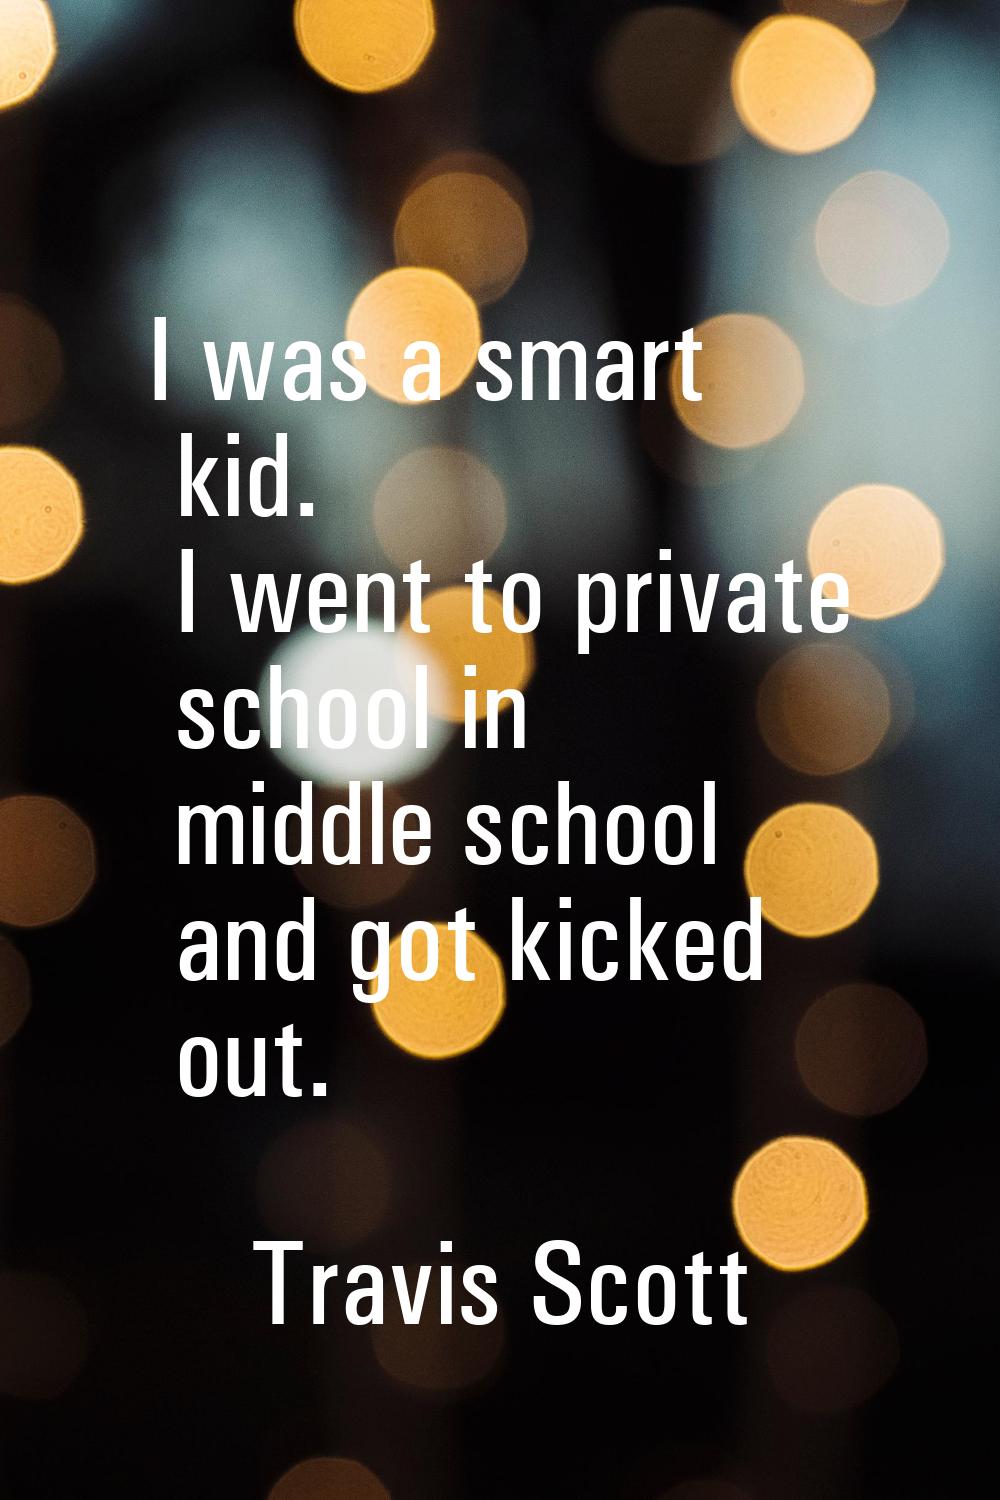 I was a smart kid. I went to private school in middle school and got kicked out.